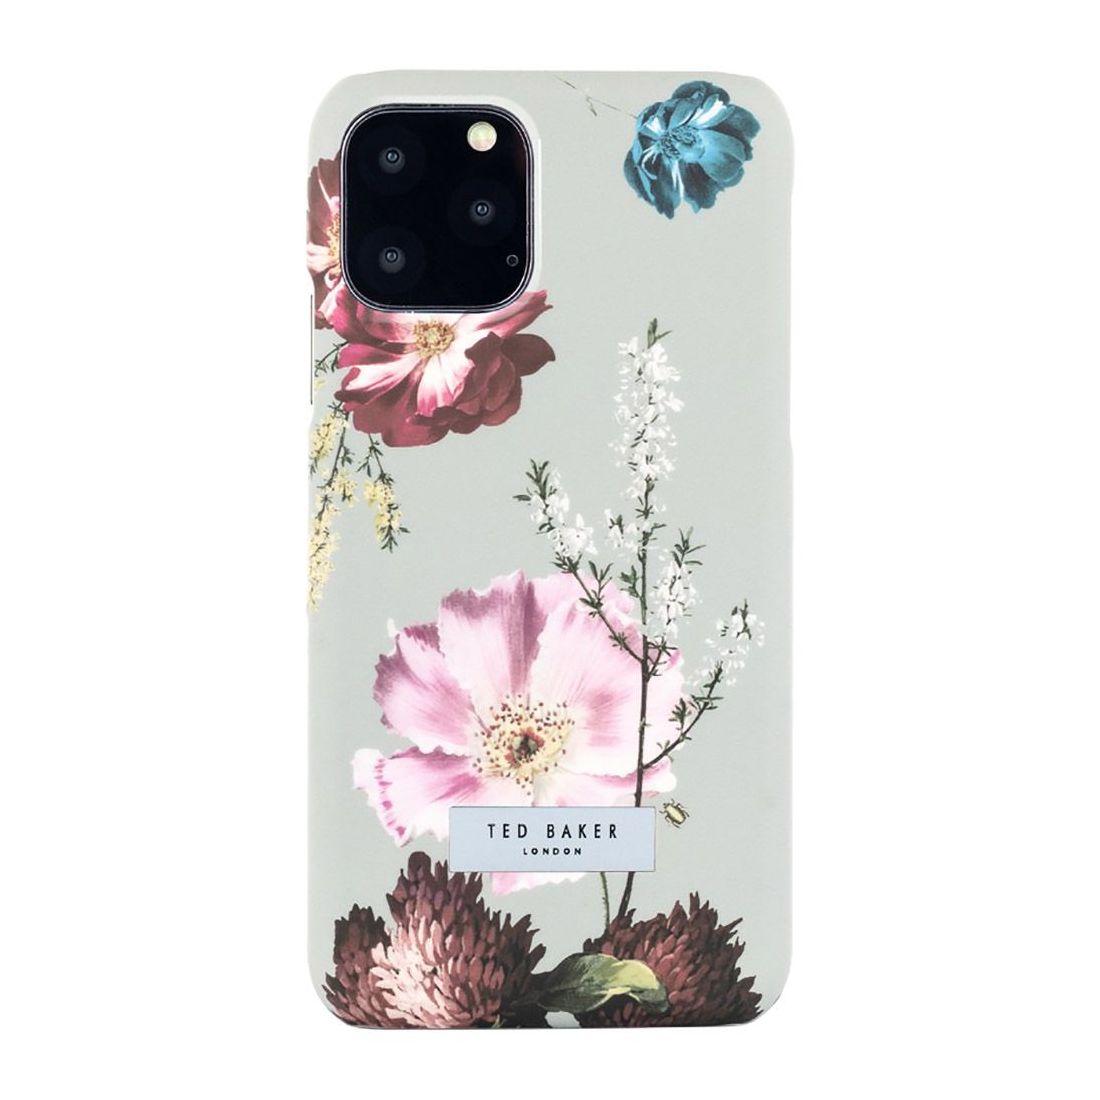 Ted Baker Hard Shell Forest Fruits Grey for iPhone 11 Pro Max